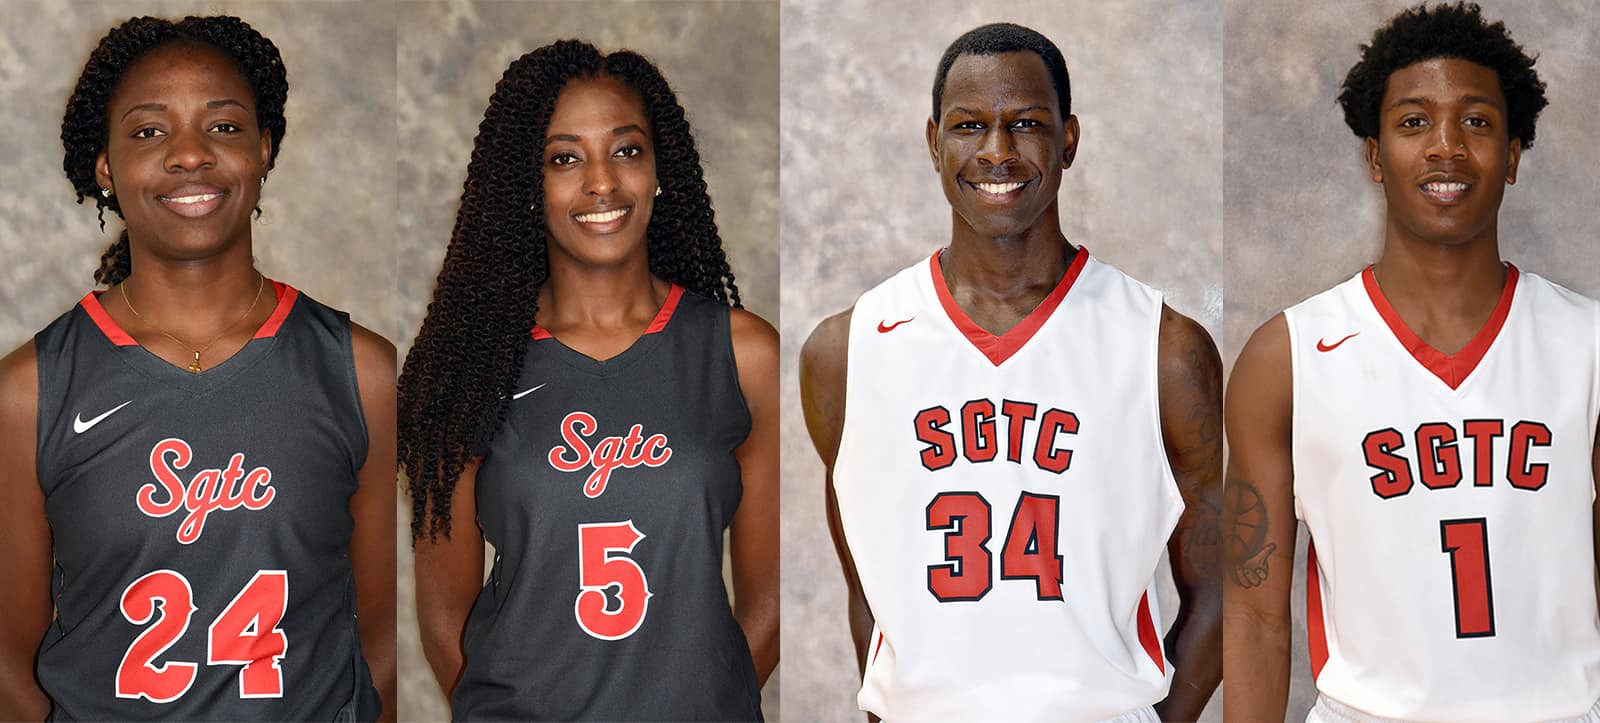 Four South Georgia Technical College Lady Jets and Jets were included in NJCAA individual rankings recently. Esther Adenike (24), Houlfat Mahouchiza (5), Marquel Wiggins (34) and Rico Simmons (1) were recognized for their talents on the court.